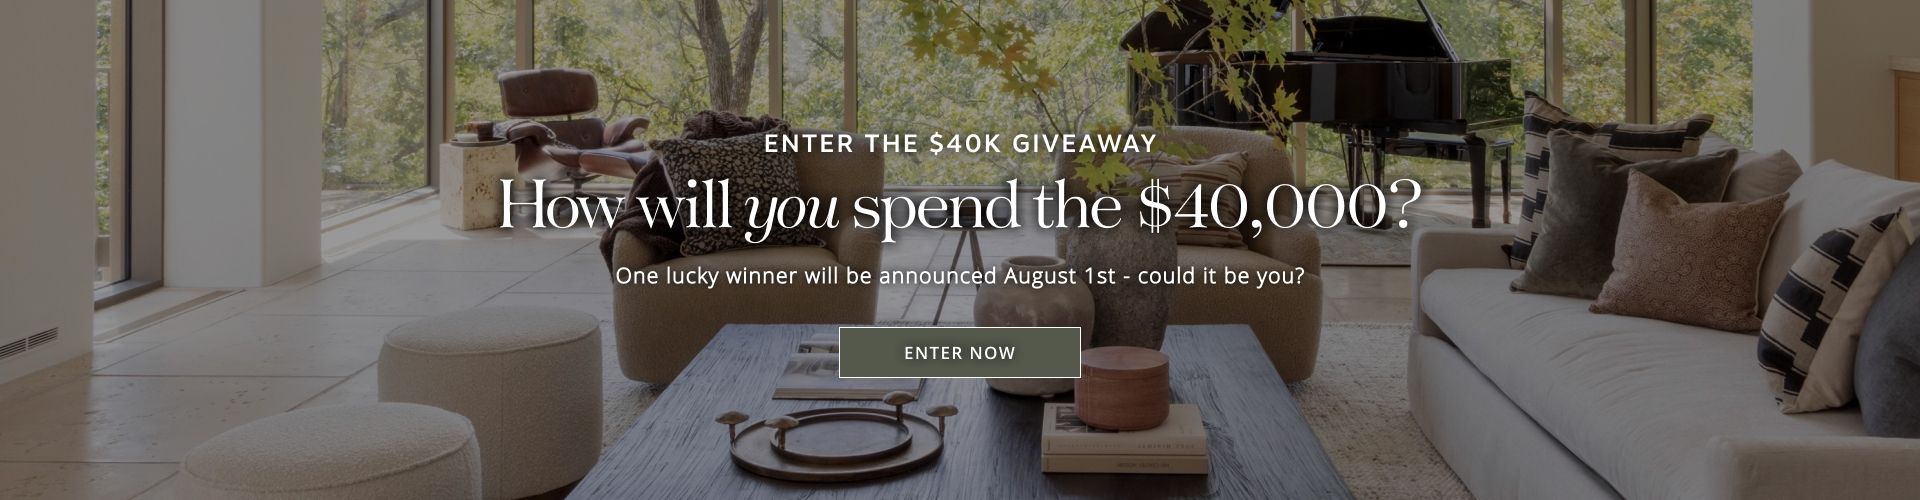 Enter the $40k Giveaway | How will you spend the $40,000? | One lucky winner will be announced August 1 - could it be you? Enter Now